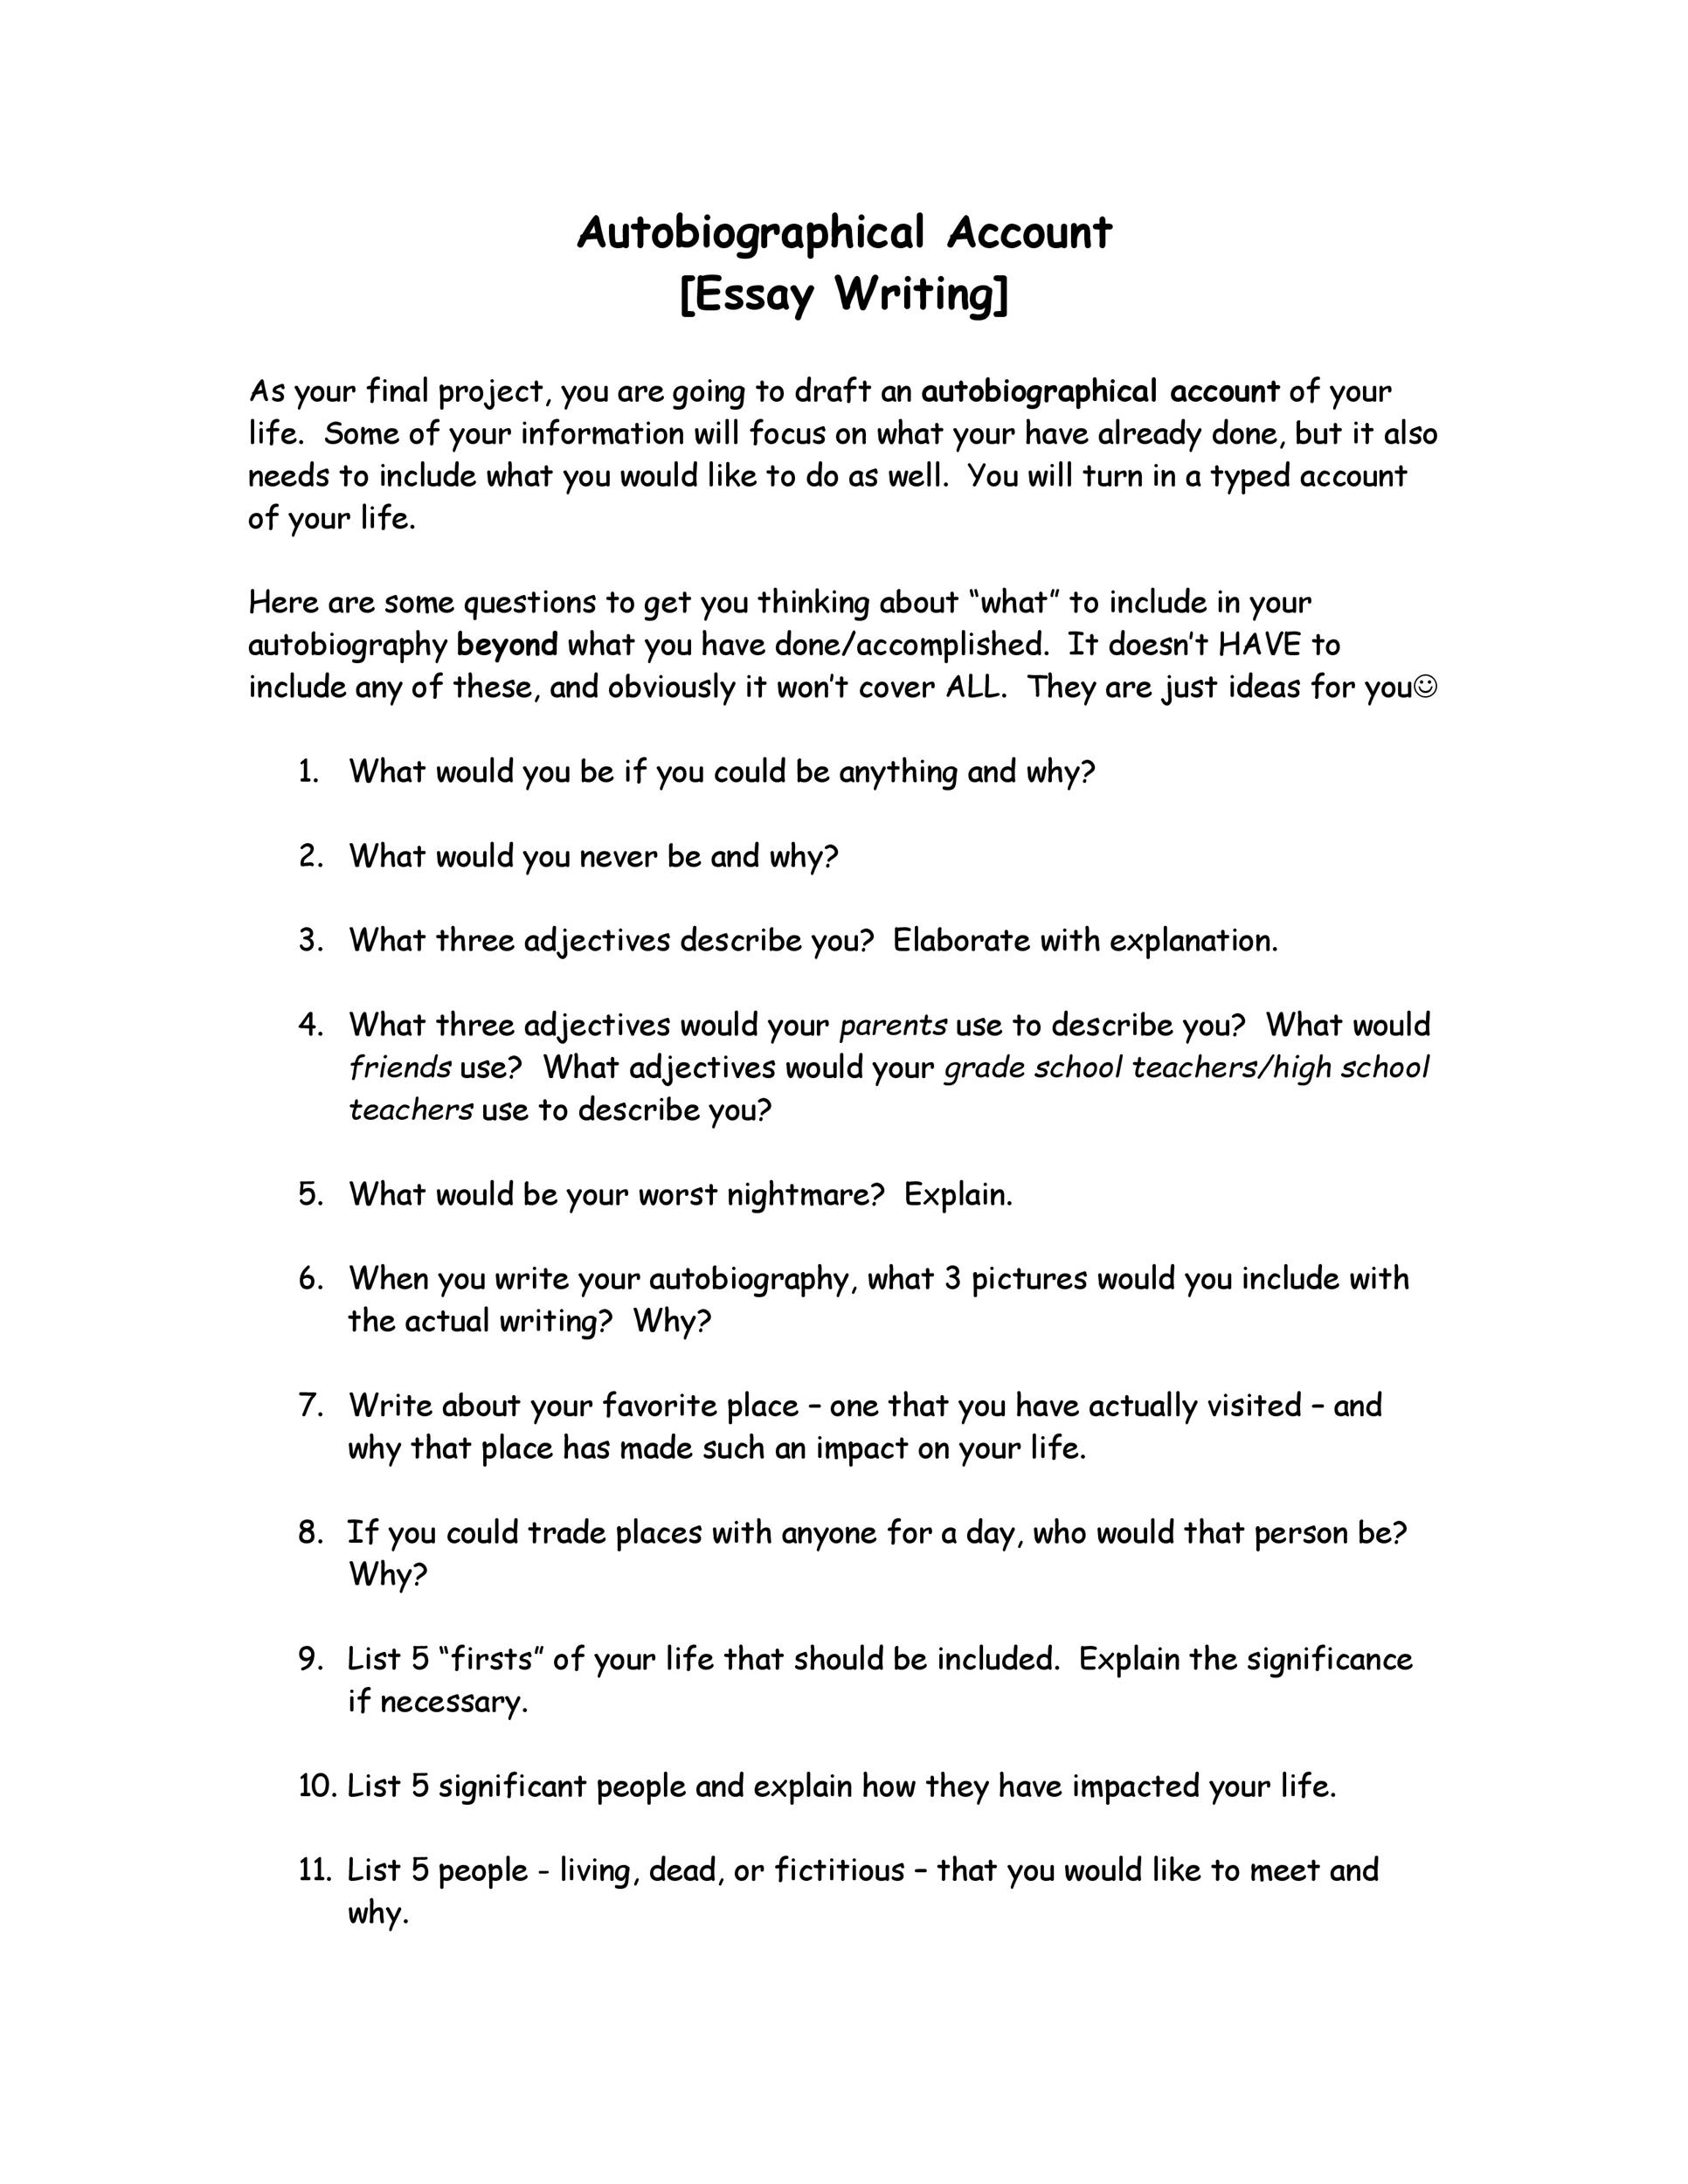 How To Excellently Write An Autobiographical Essay ()